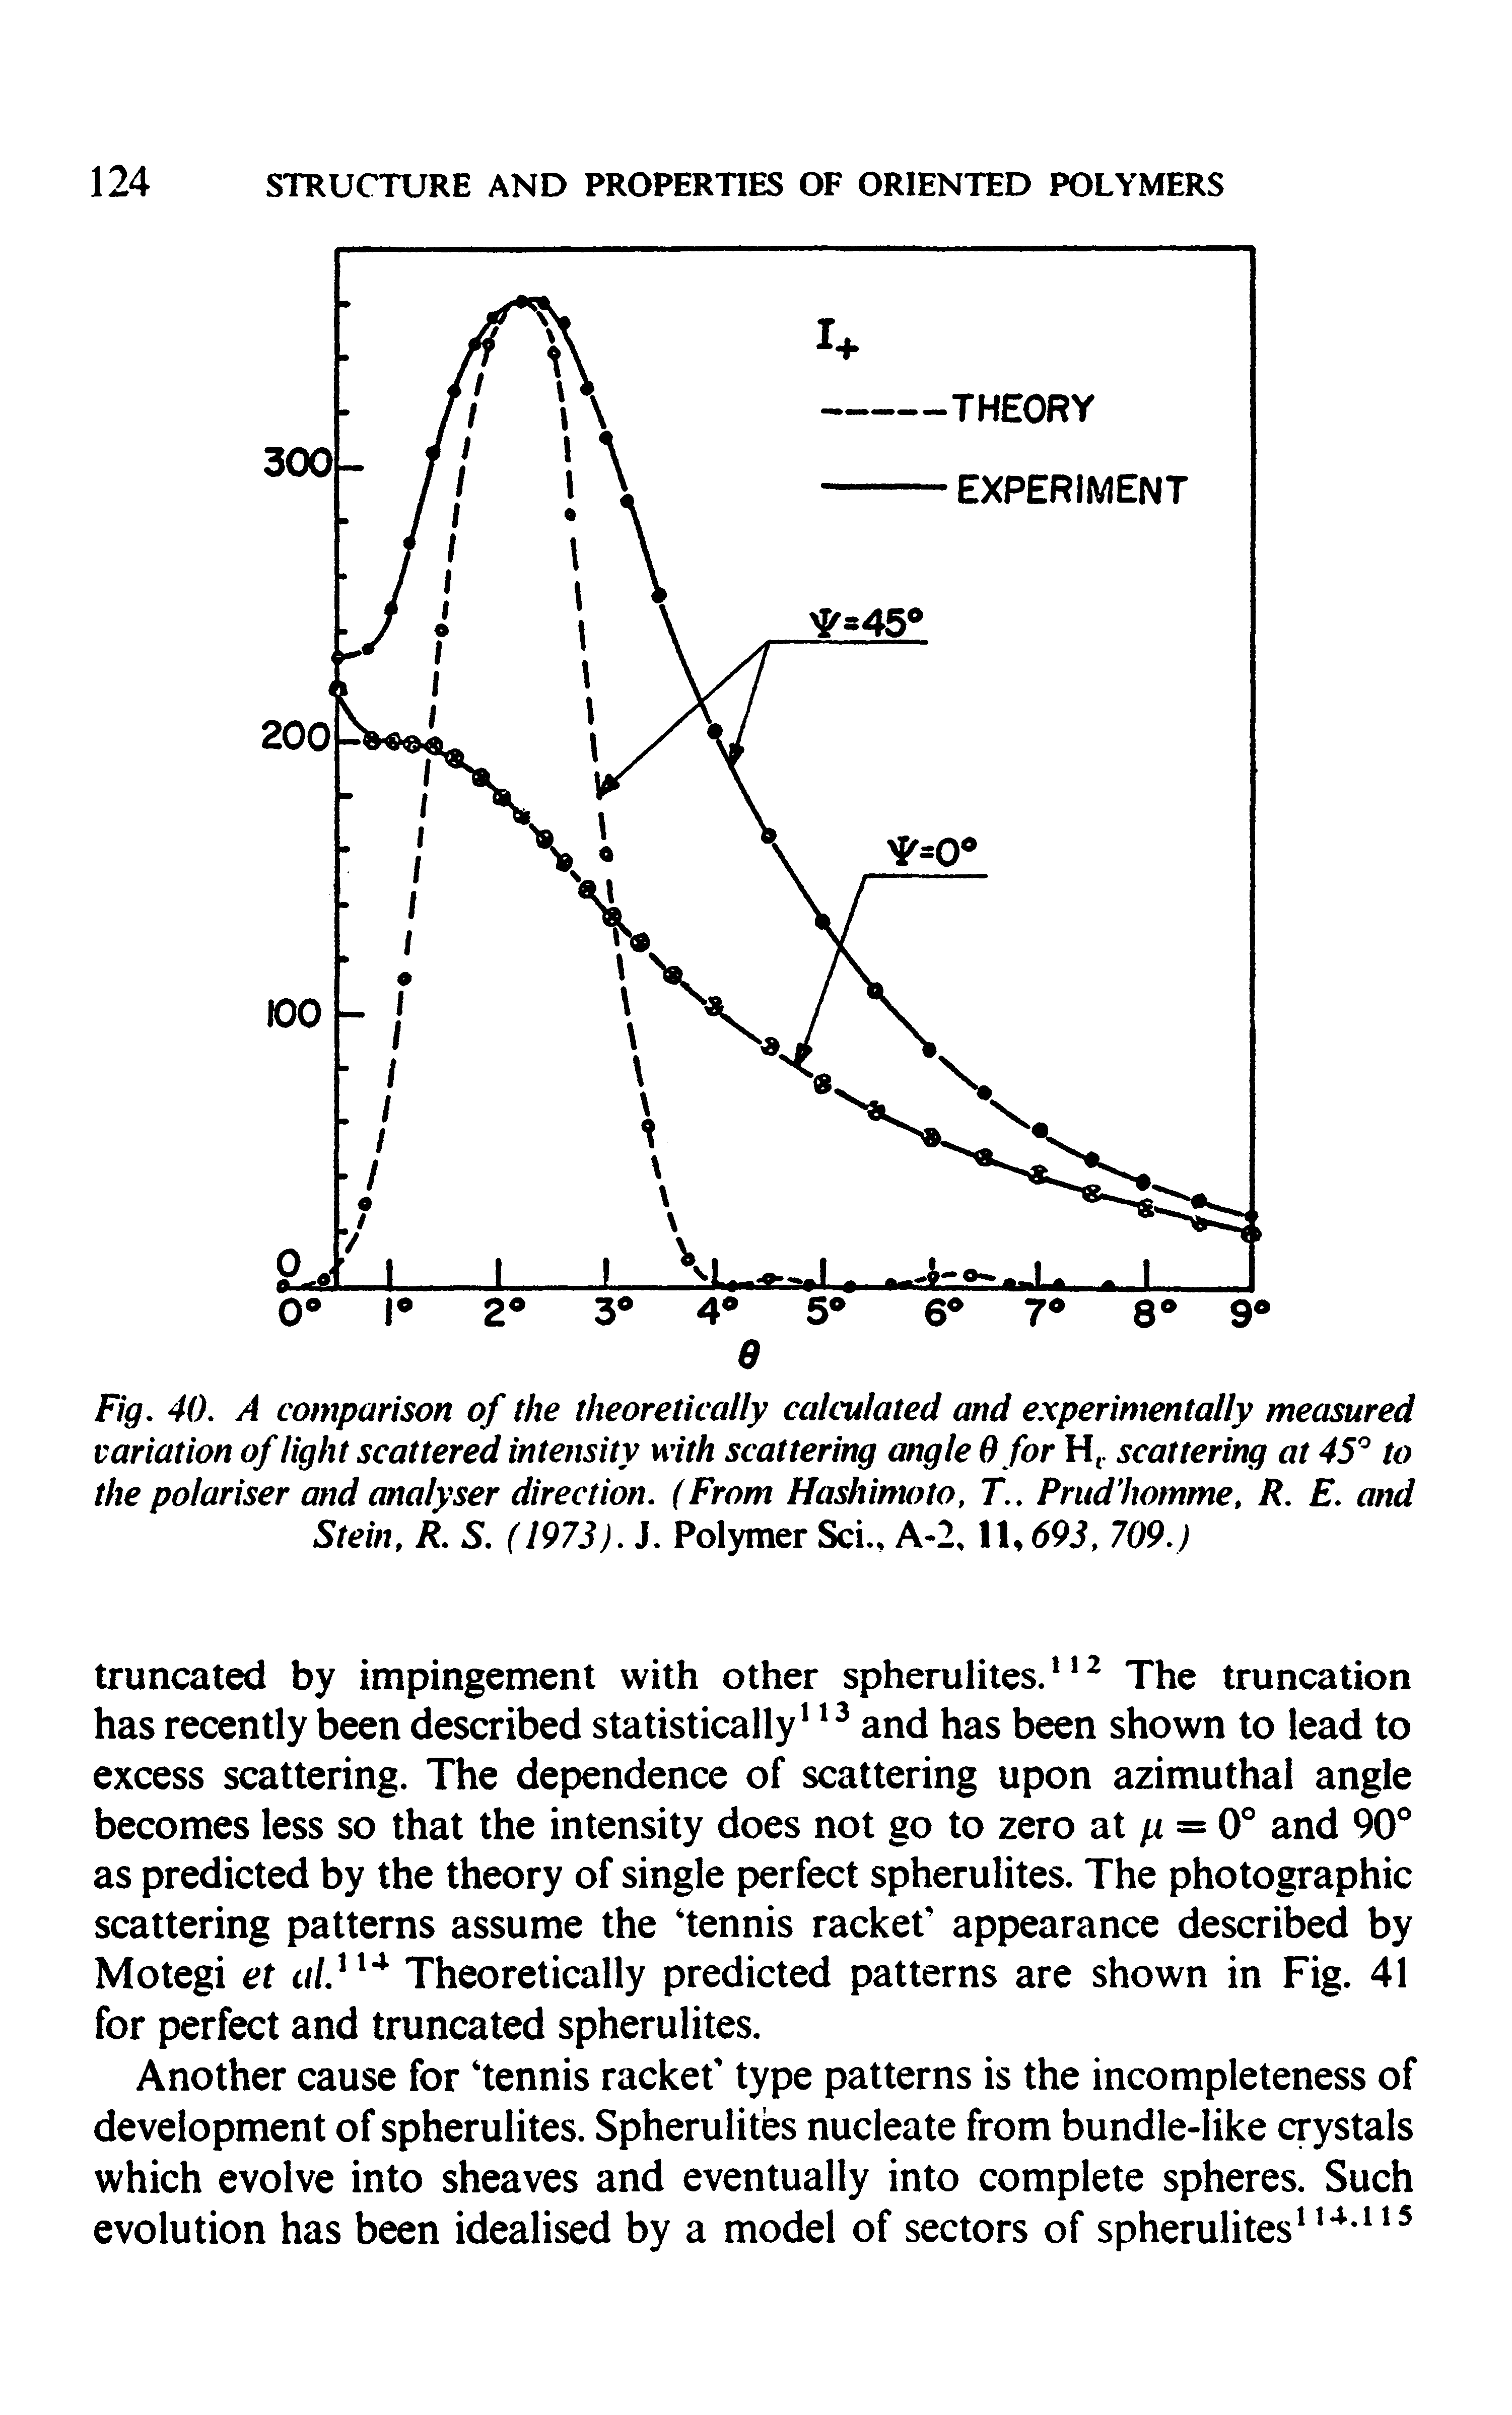 Fig. 40. A comparison of the theoretically calculated and experimentally measured variation of light scattered intensity with scattering angle 0 for Hr scattering at 45 to the polariser and analyser direction. (From Hashimoto, T.. Prud homme, R. E. and Stein. R. S. (1973). J. Polymer Sci., A-2, U693. 709.)...